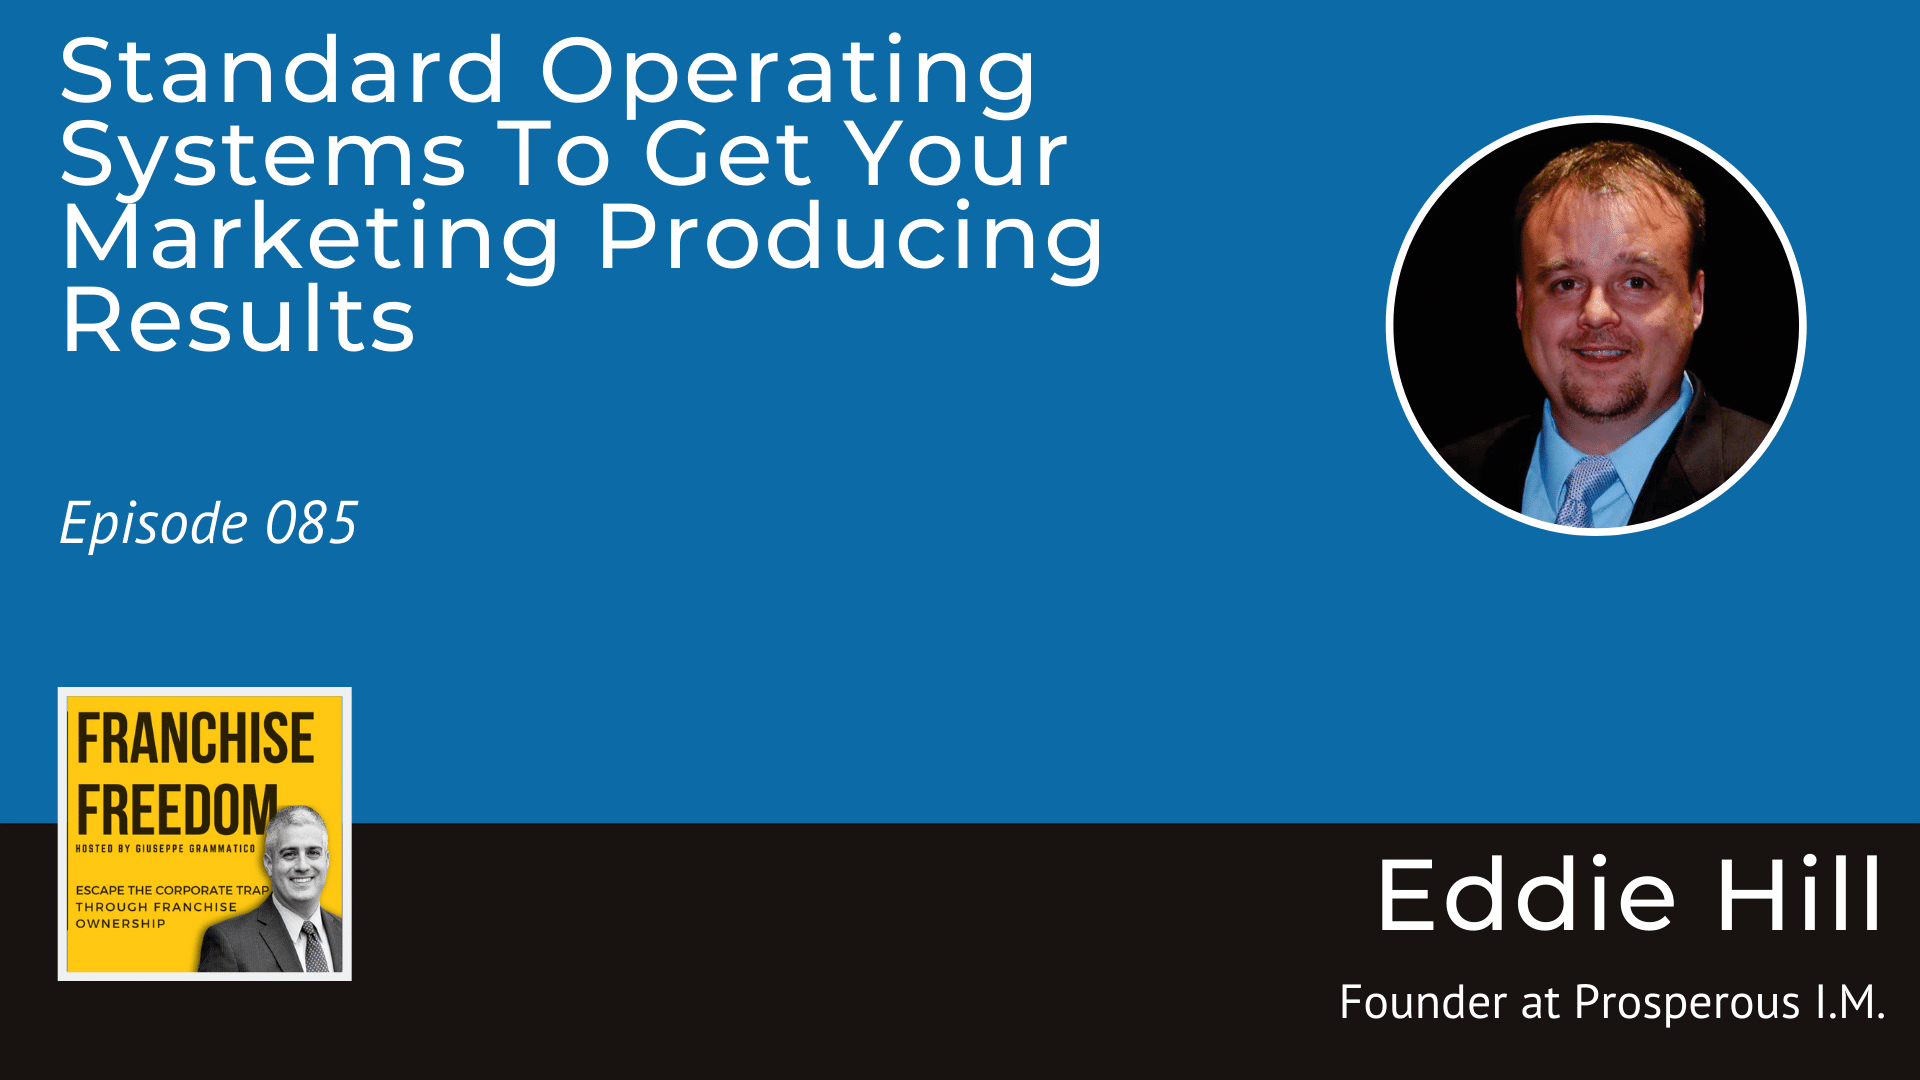 Standard Operating Systems To Get Your Marketing Producing Results